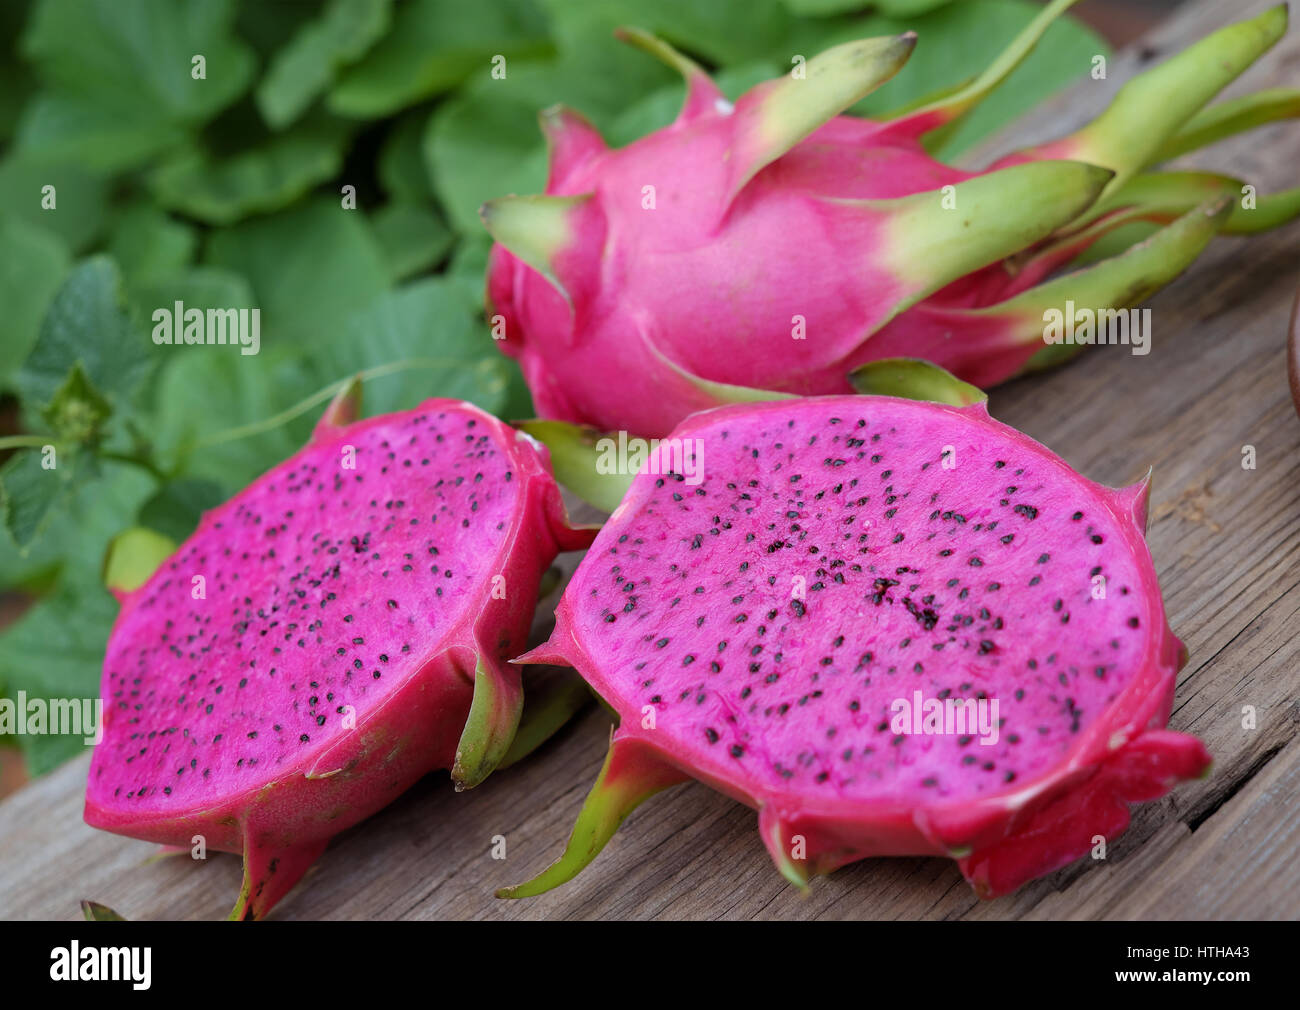 Eating dragon fruit, a tropical fruits, Vietnam agriculture product, with  purle, pink color, close up of delicious dessert at garden Stock Photo -  Alamy